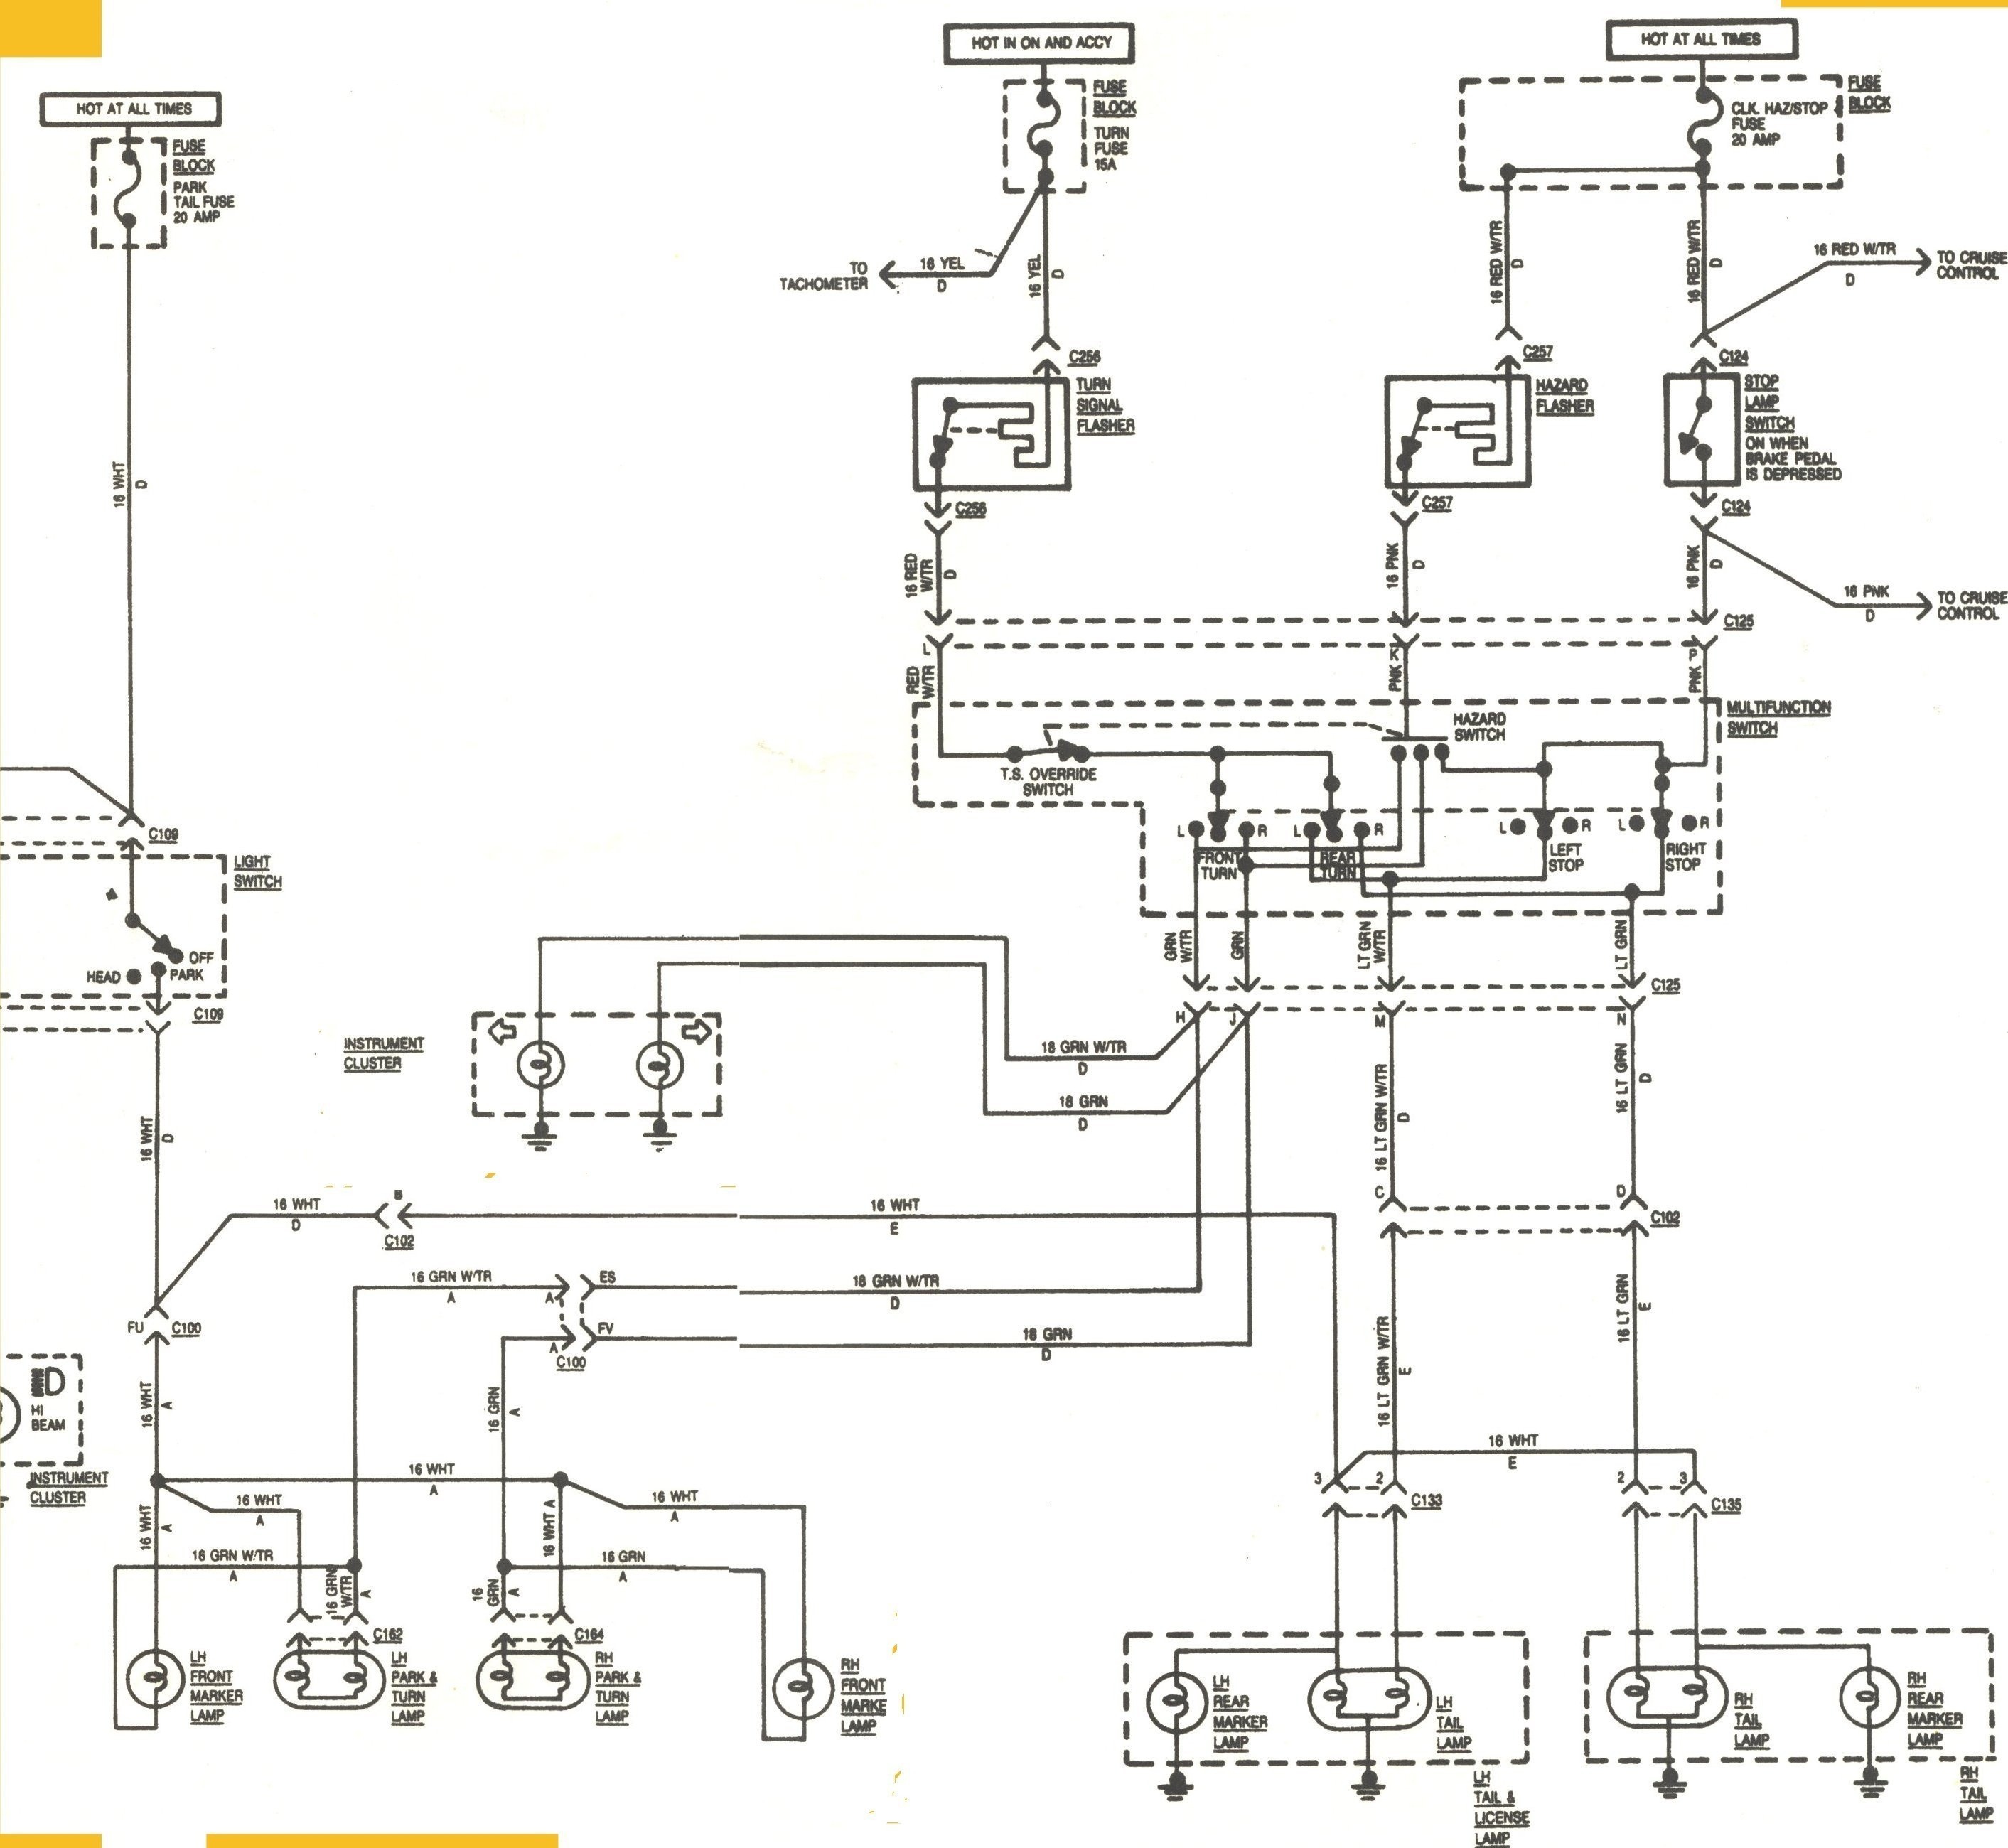 Wiring Diagrams for Turn Signal New Turn Signal Flasher Diagram Turn Signal Wiring Diagram Turn Signal